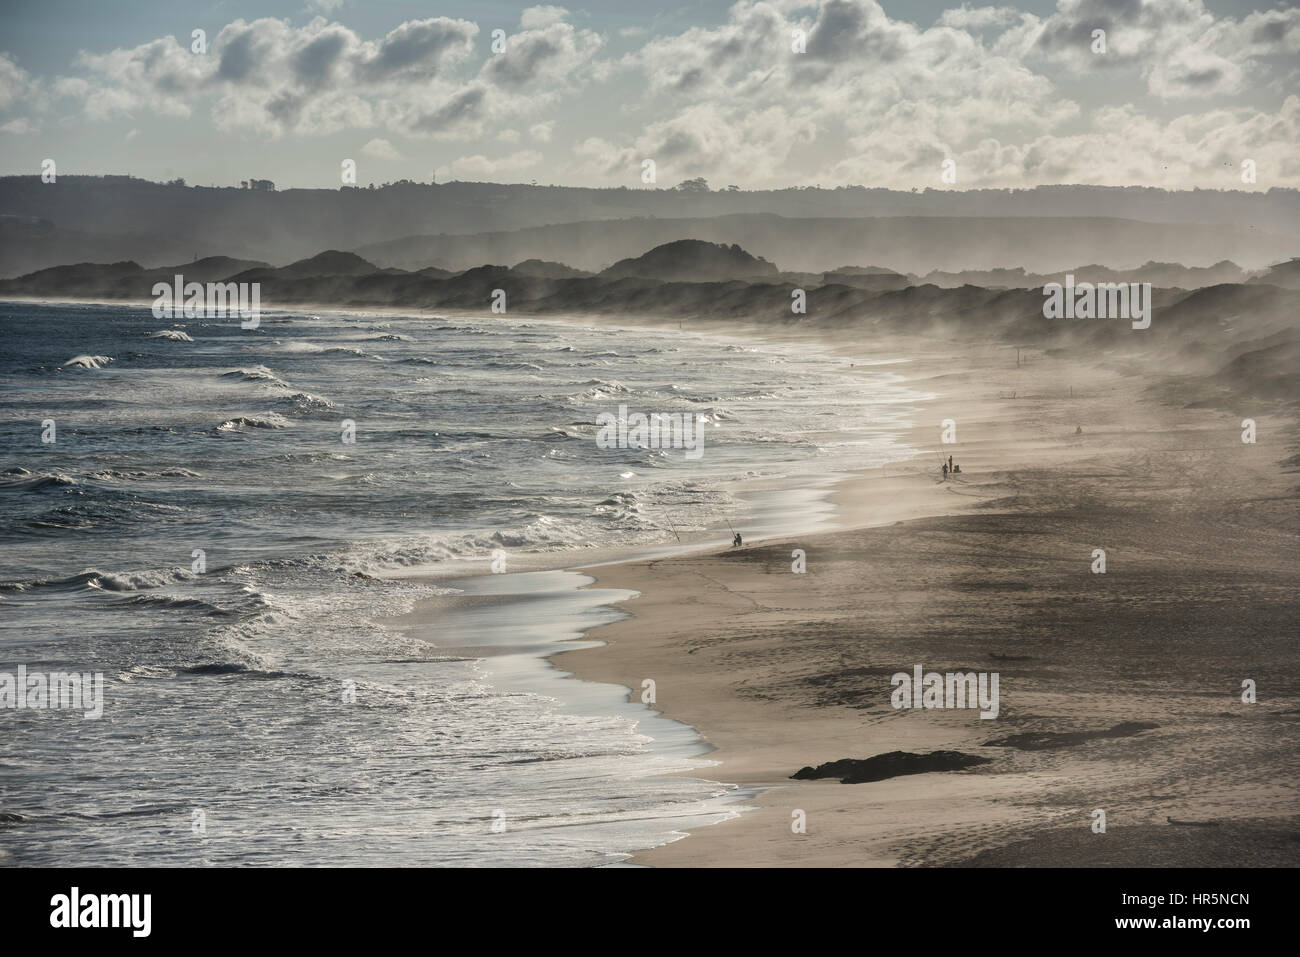 The Beach at Keurboomstrand in Late Afternoon light, Western Cape, South Africa Stock Photo